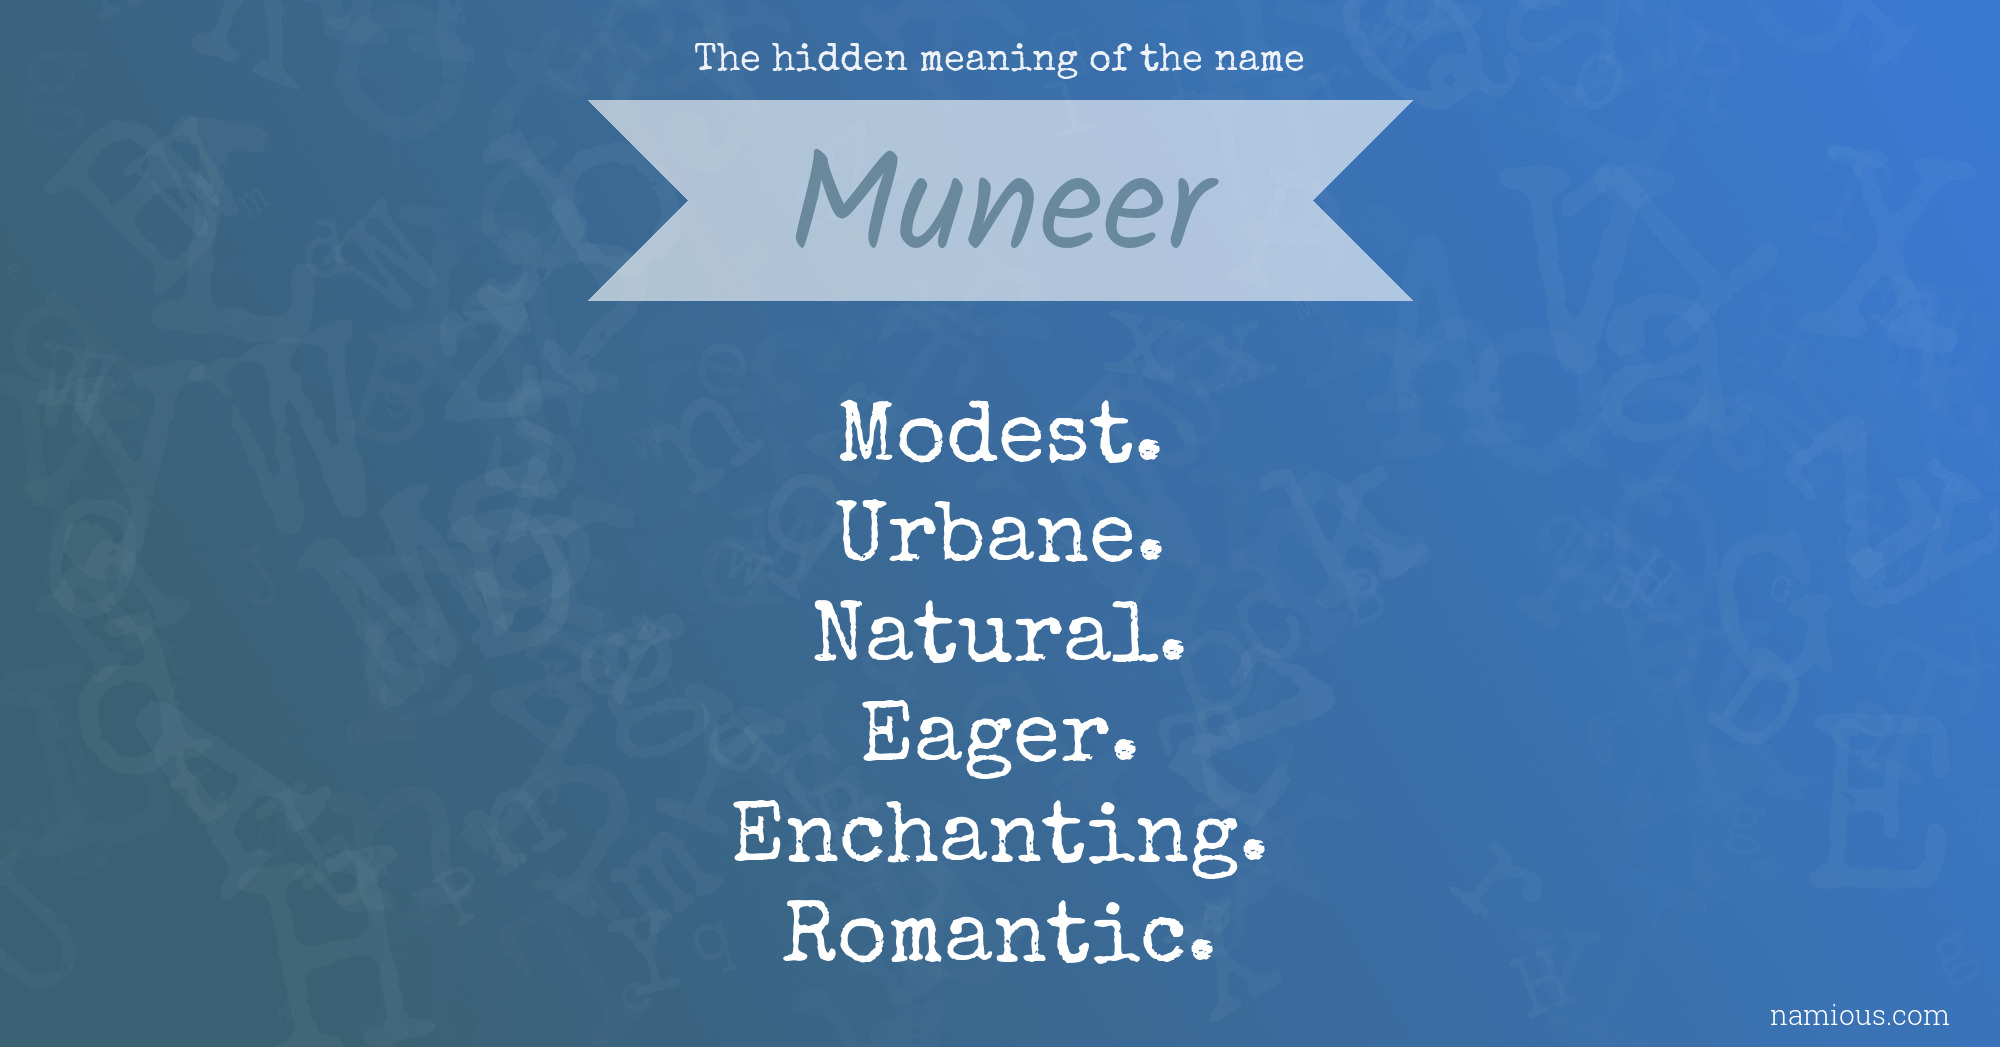 The hidden meaning of the name Muneer